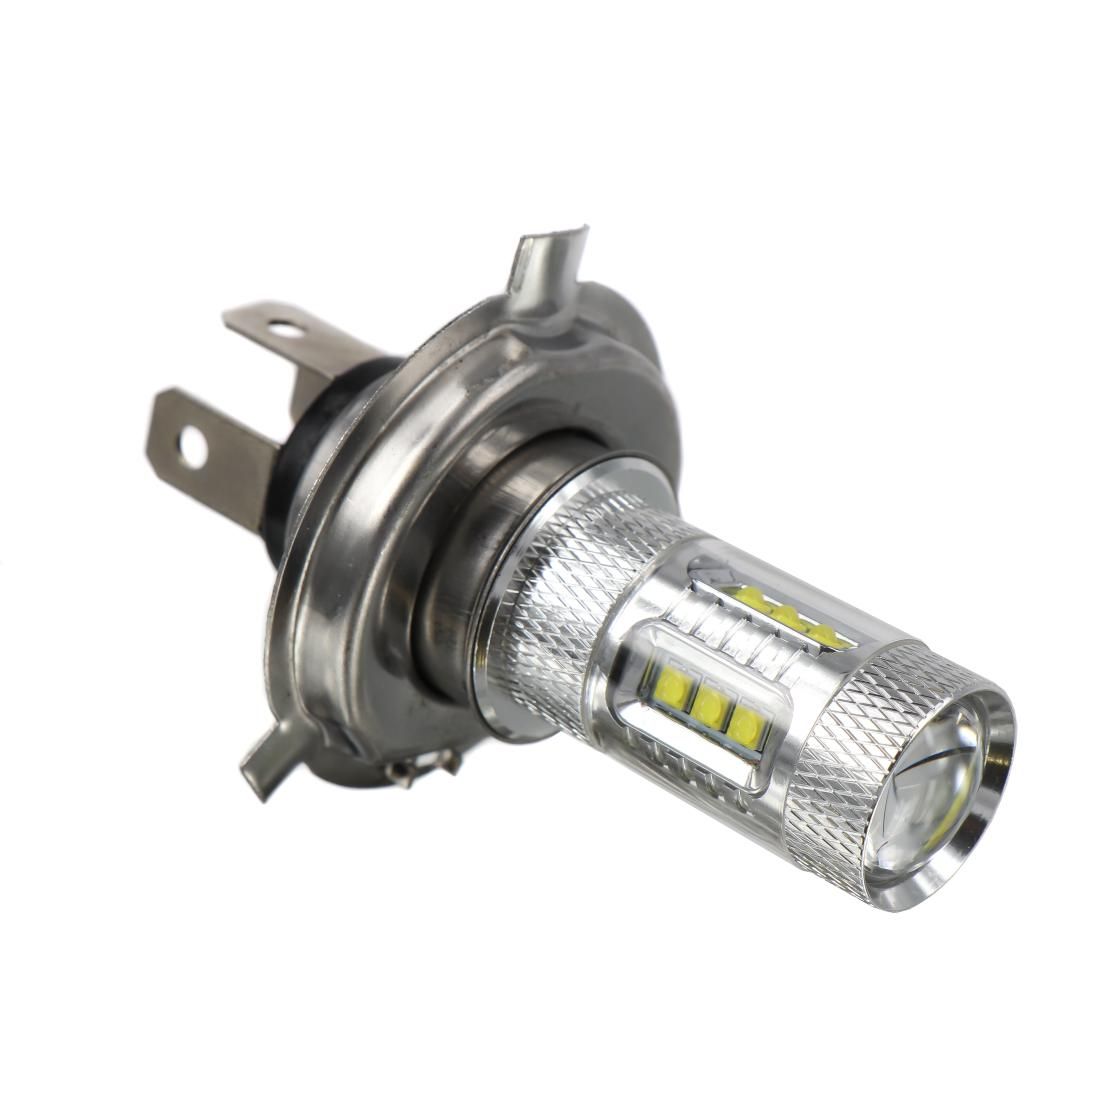 AMPOULE LED H4 CREE XPE 80W 55/60w DRL CANBUS CULOT P43T 6000K